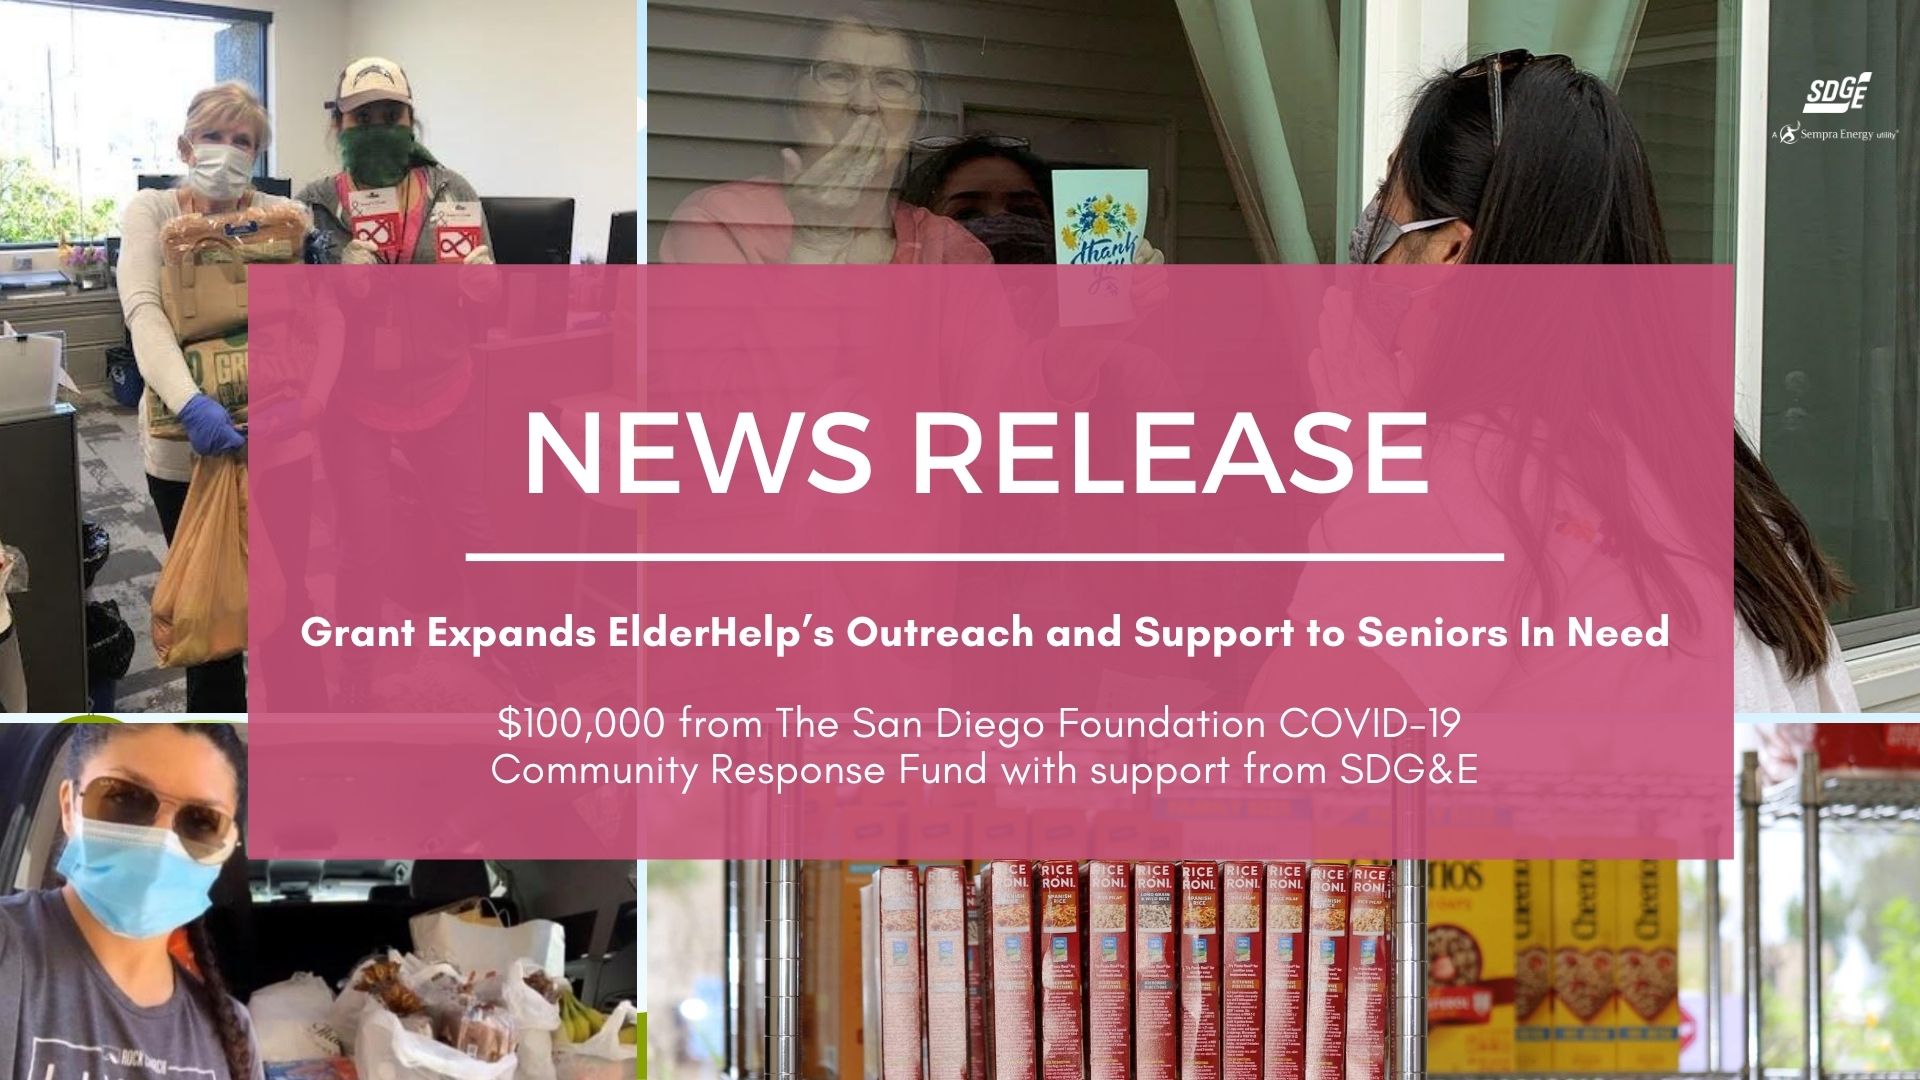 Grant Expands ElderHelp’s Outreach and Support to Seniors In Need